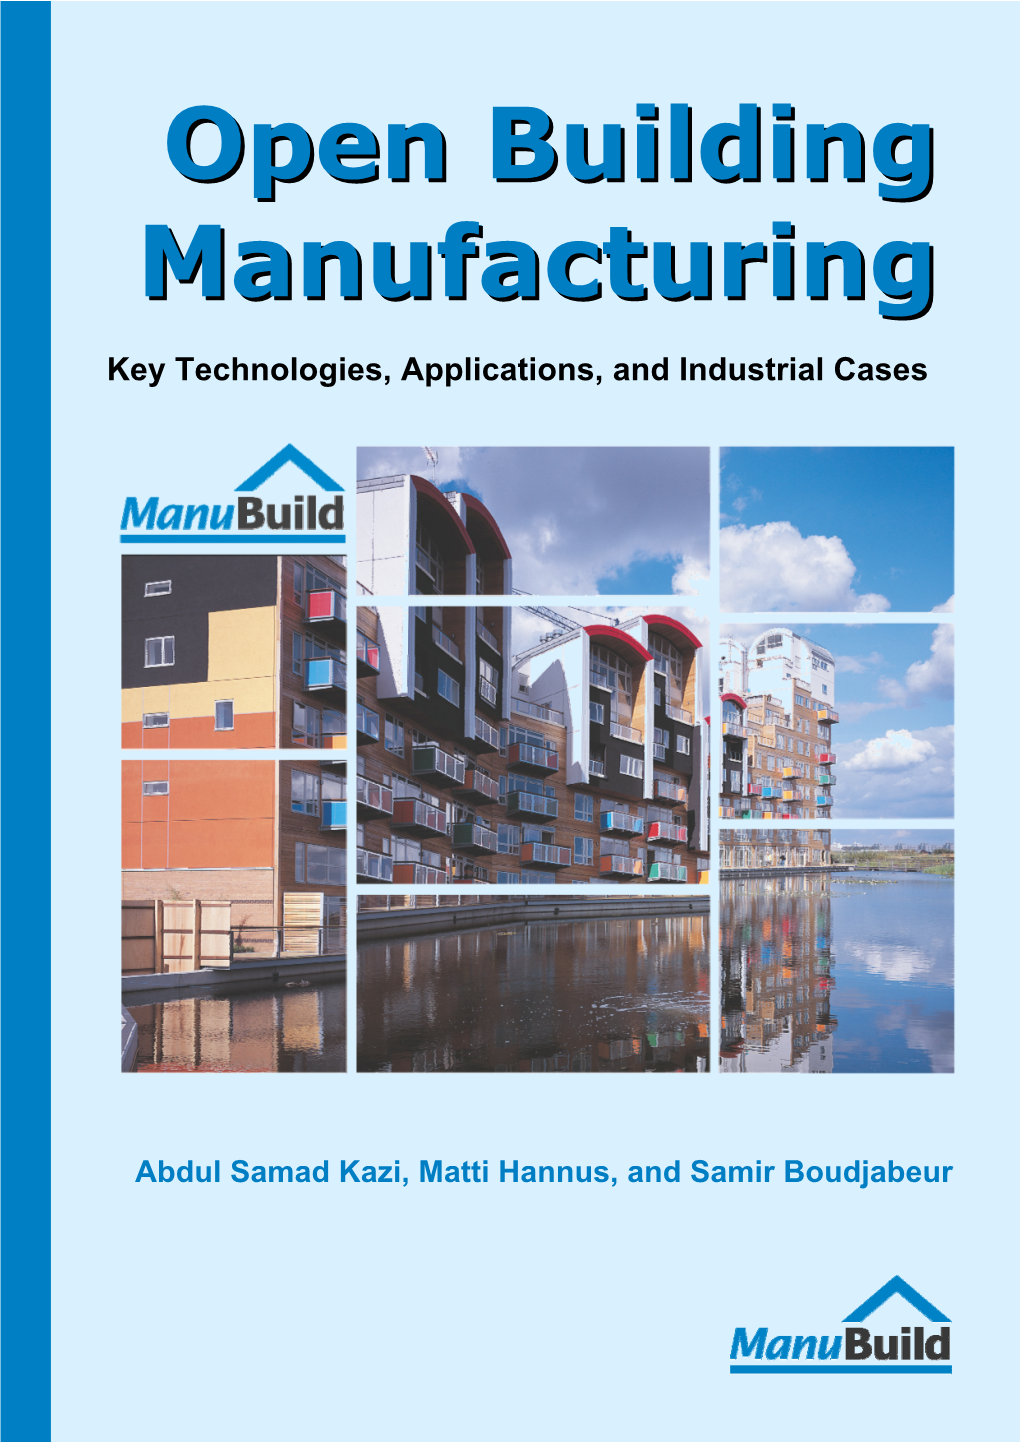 Open Building Manufacturing Key Technologies, Applications, and Industrial Cases